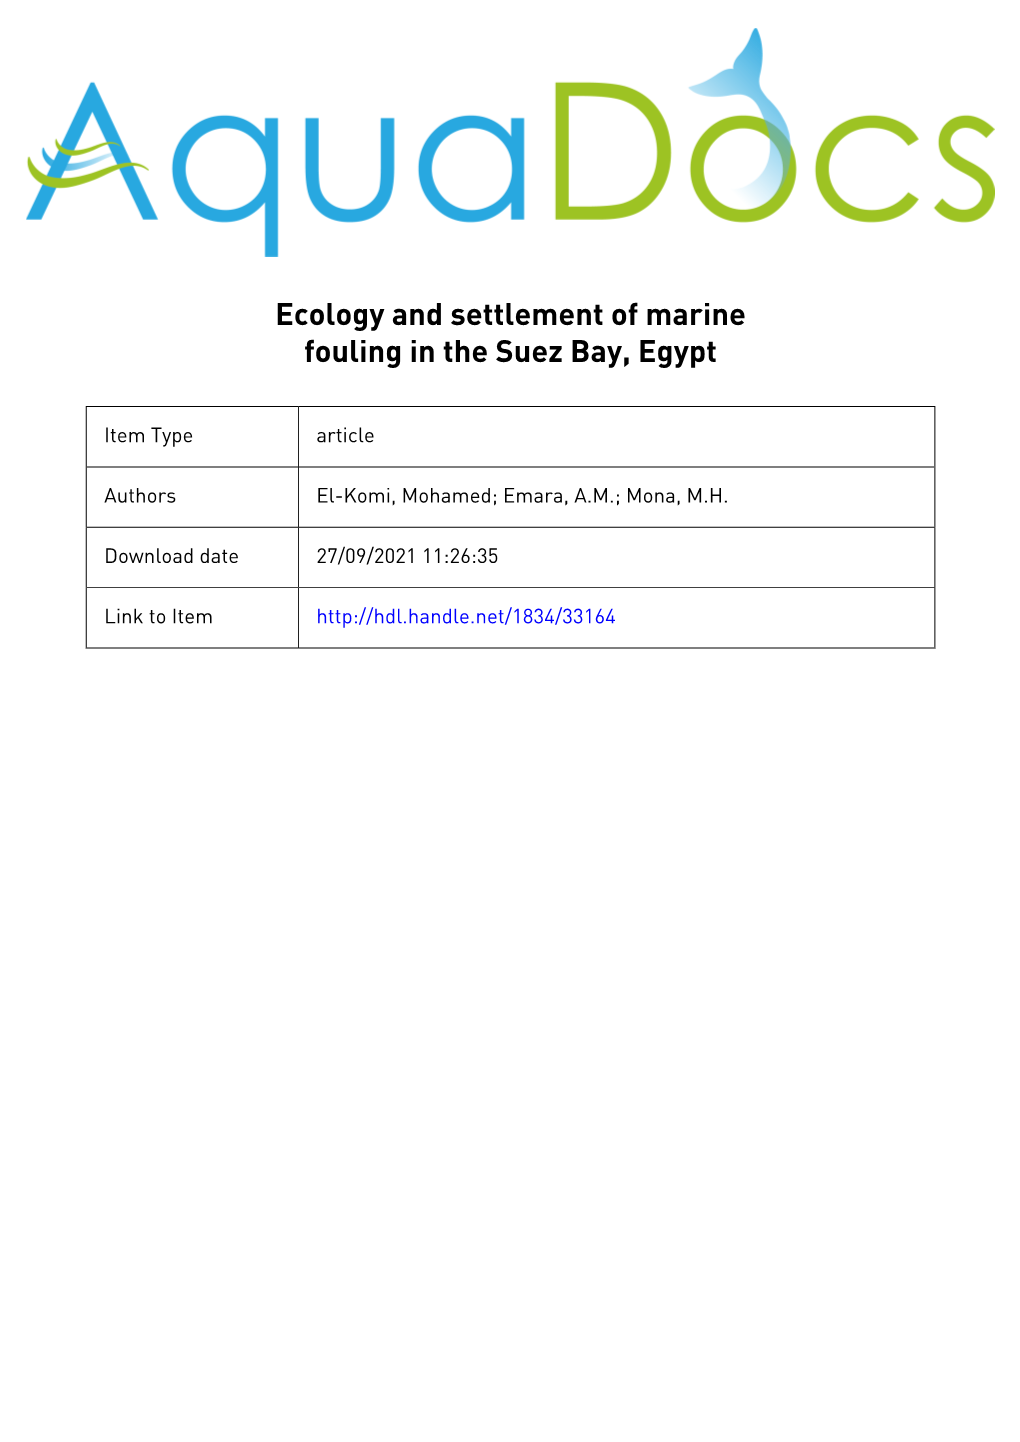 Ecology and Settlement of Marine Fouling in the Suez Bay, Egypt